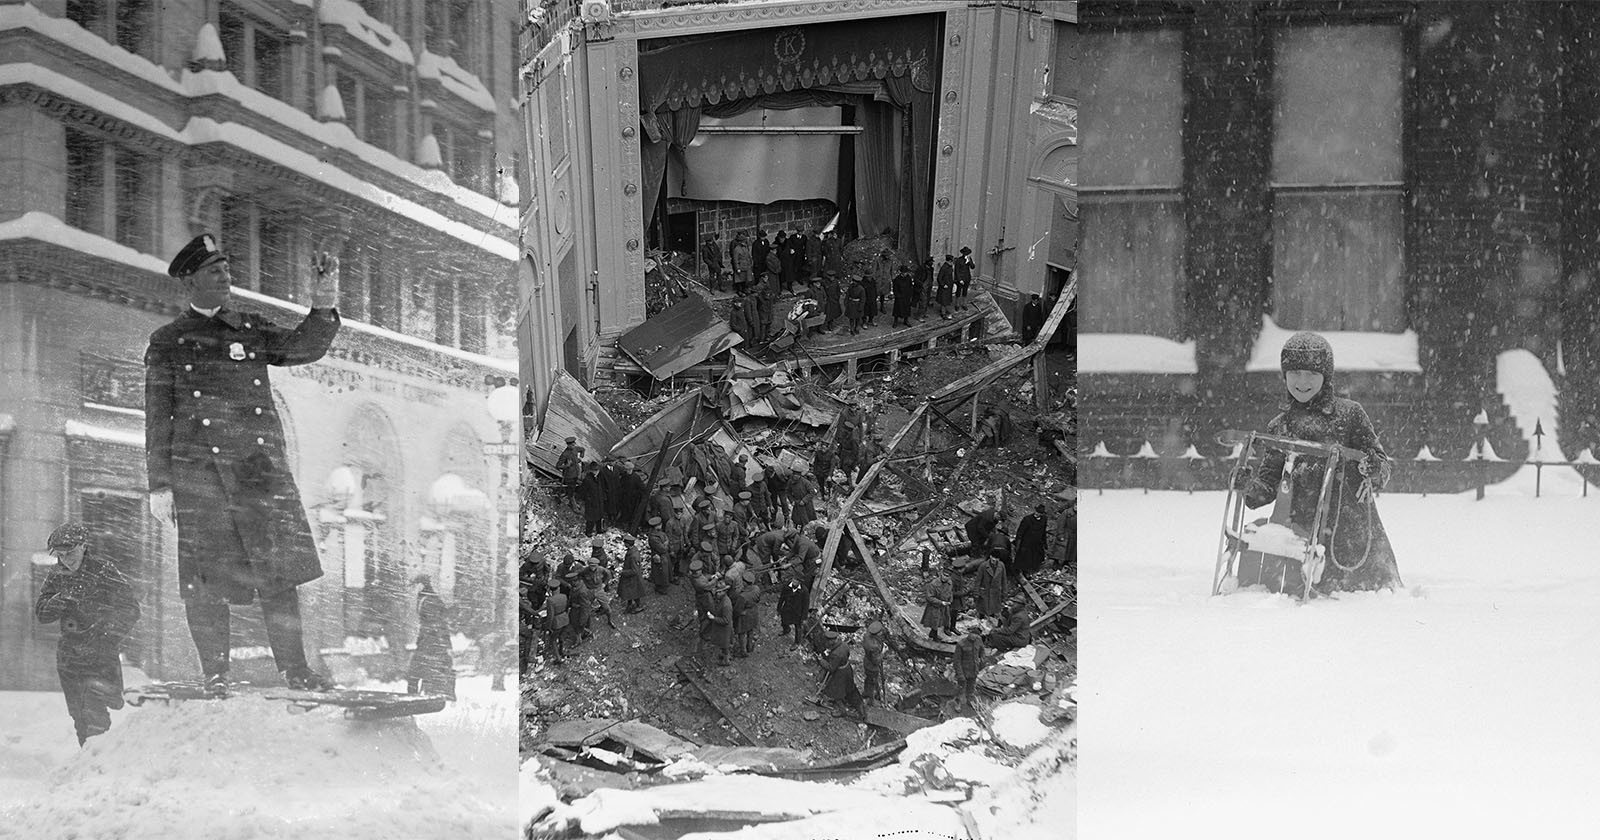 The Deadly Snowstorm of 22: Historic Photos of Blizzard from 100 Years Ago